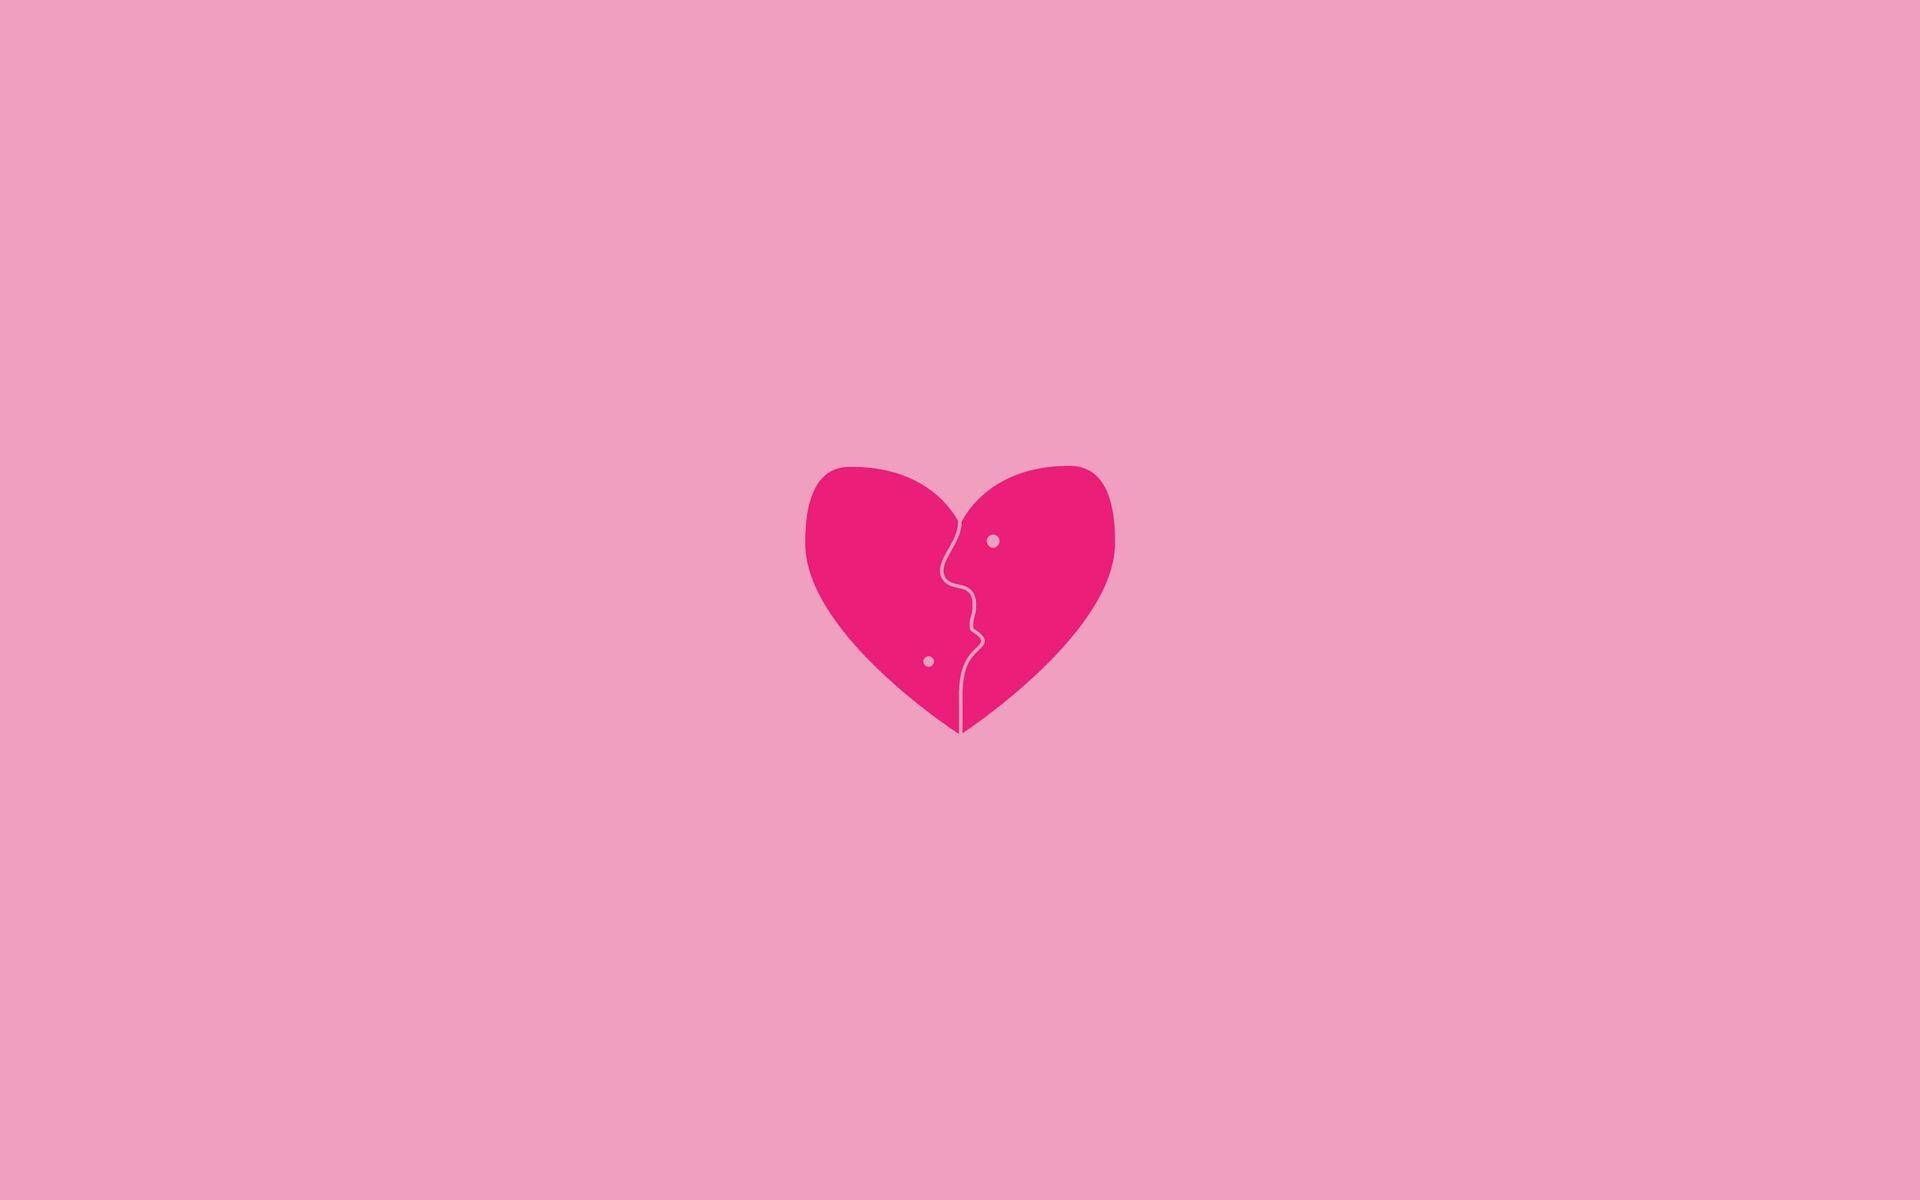 A pink heart with a puzzle piece missing - Heart